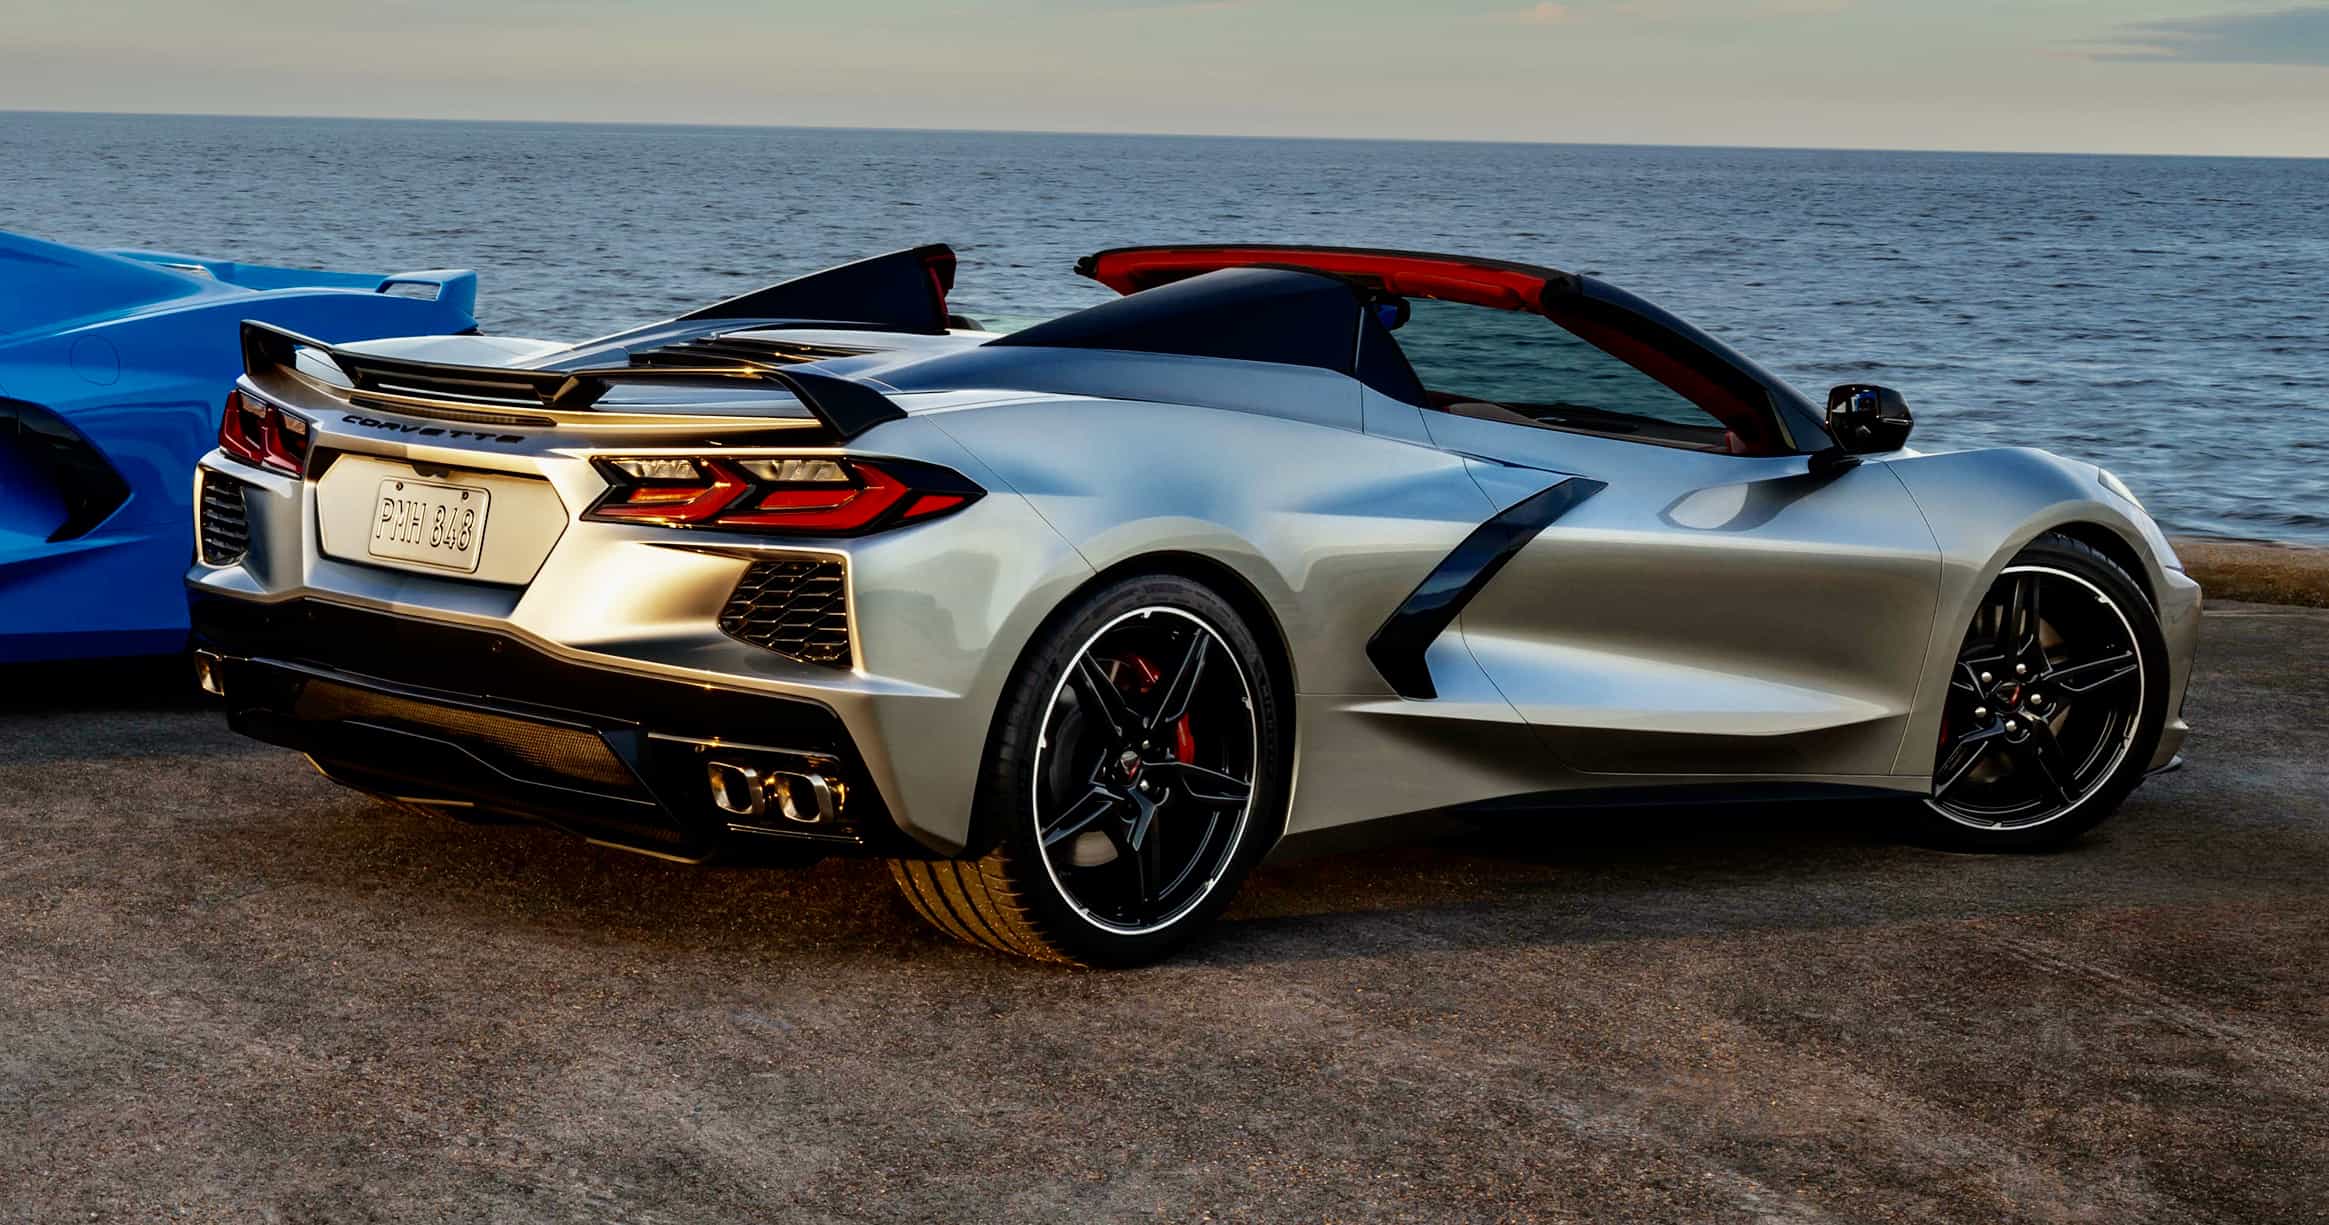 Chevy Will Hold Pricing Of 2021 C8 Corvette At 20 Figures